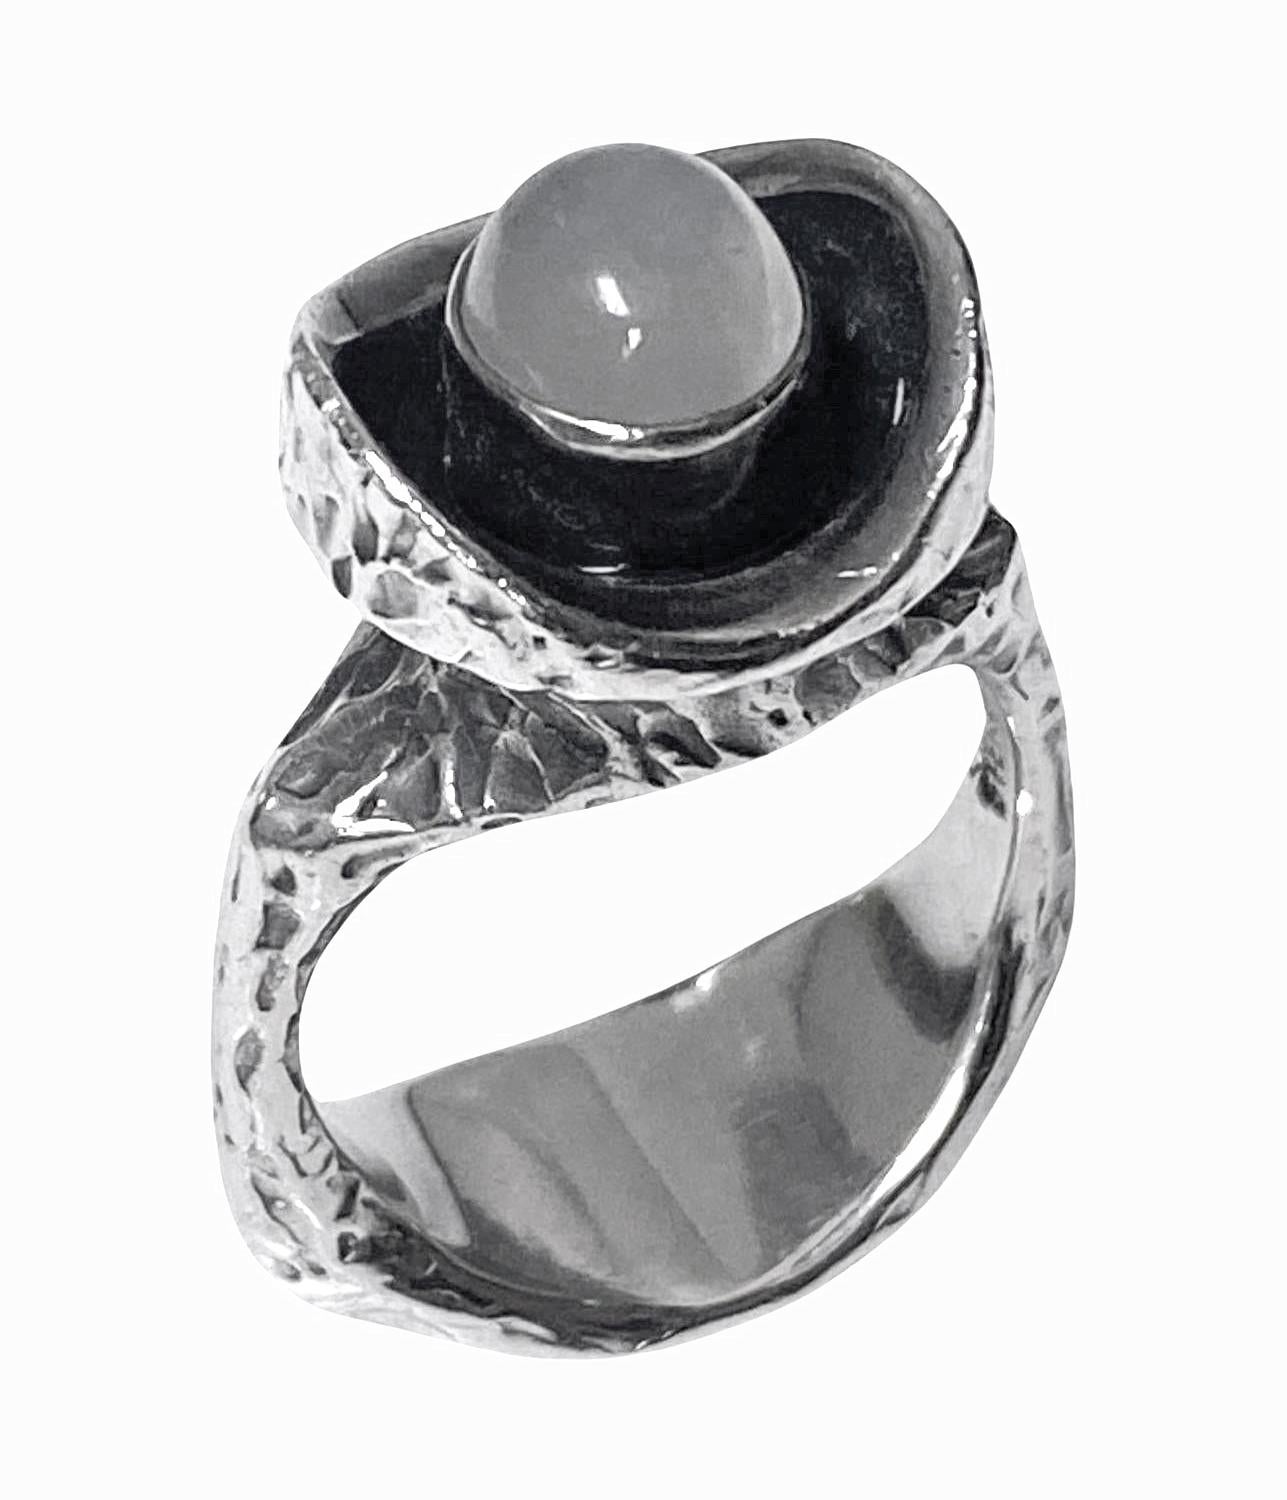 Walter Schluep Sterling Silver Sculptural handmade Ring, C.1970. The concave top oxidised with bezel set moonstone, the surround mount with bark like texture. Top approximately 14.70 mm. Ring size 7. Signed Schluep Sterling. Item Weight: 12.34